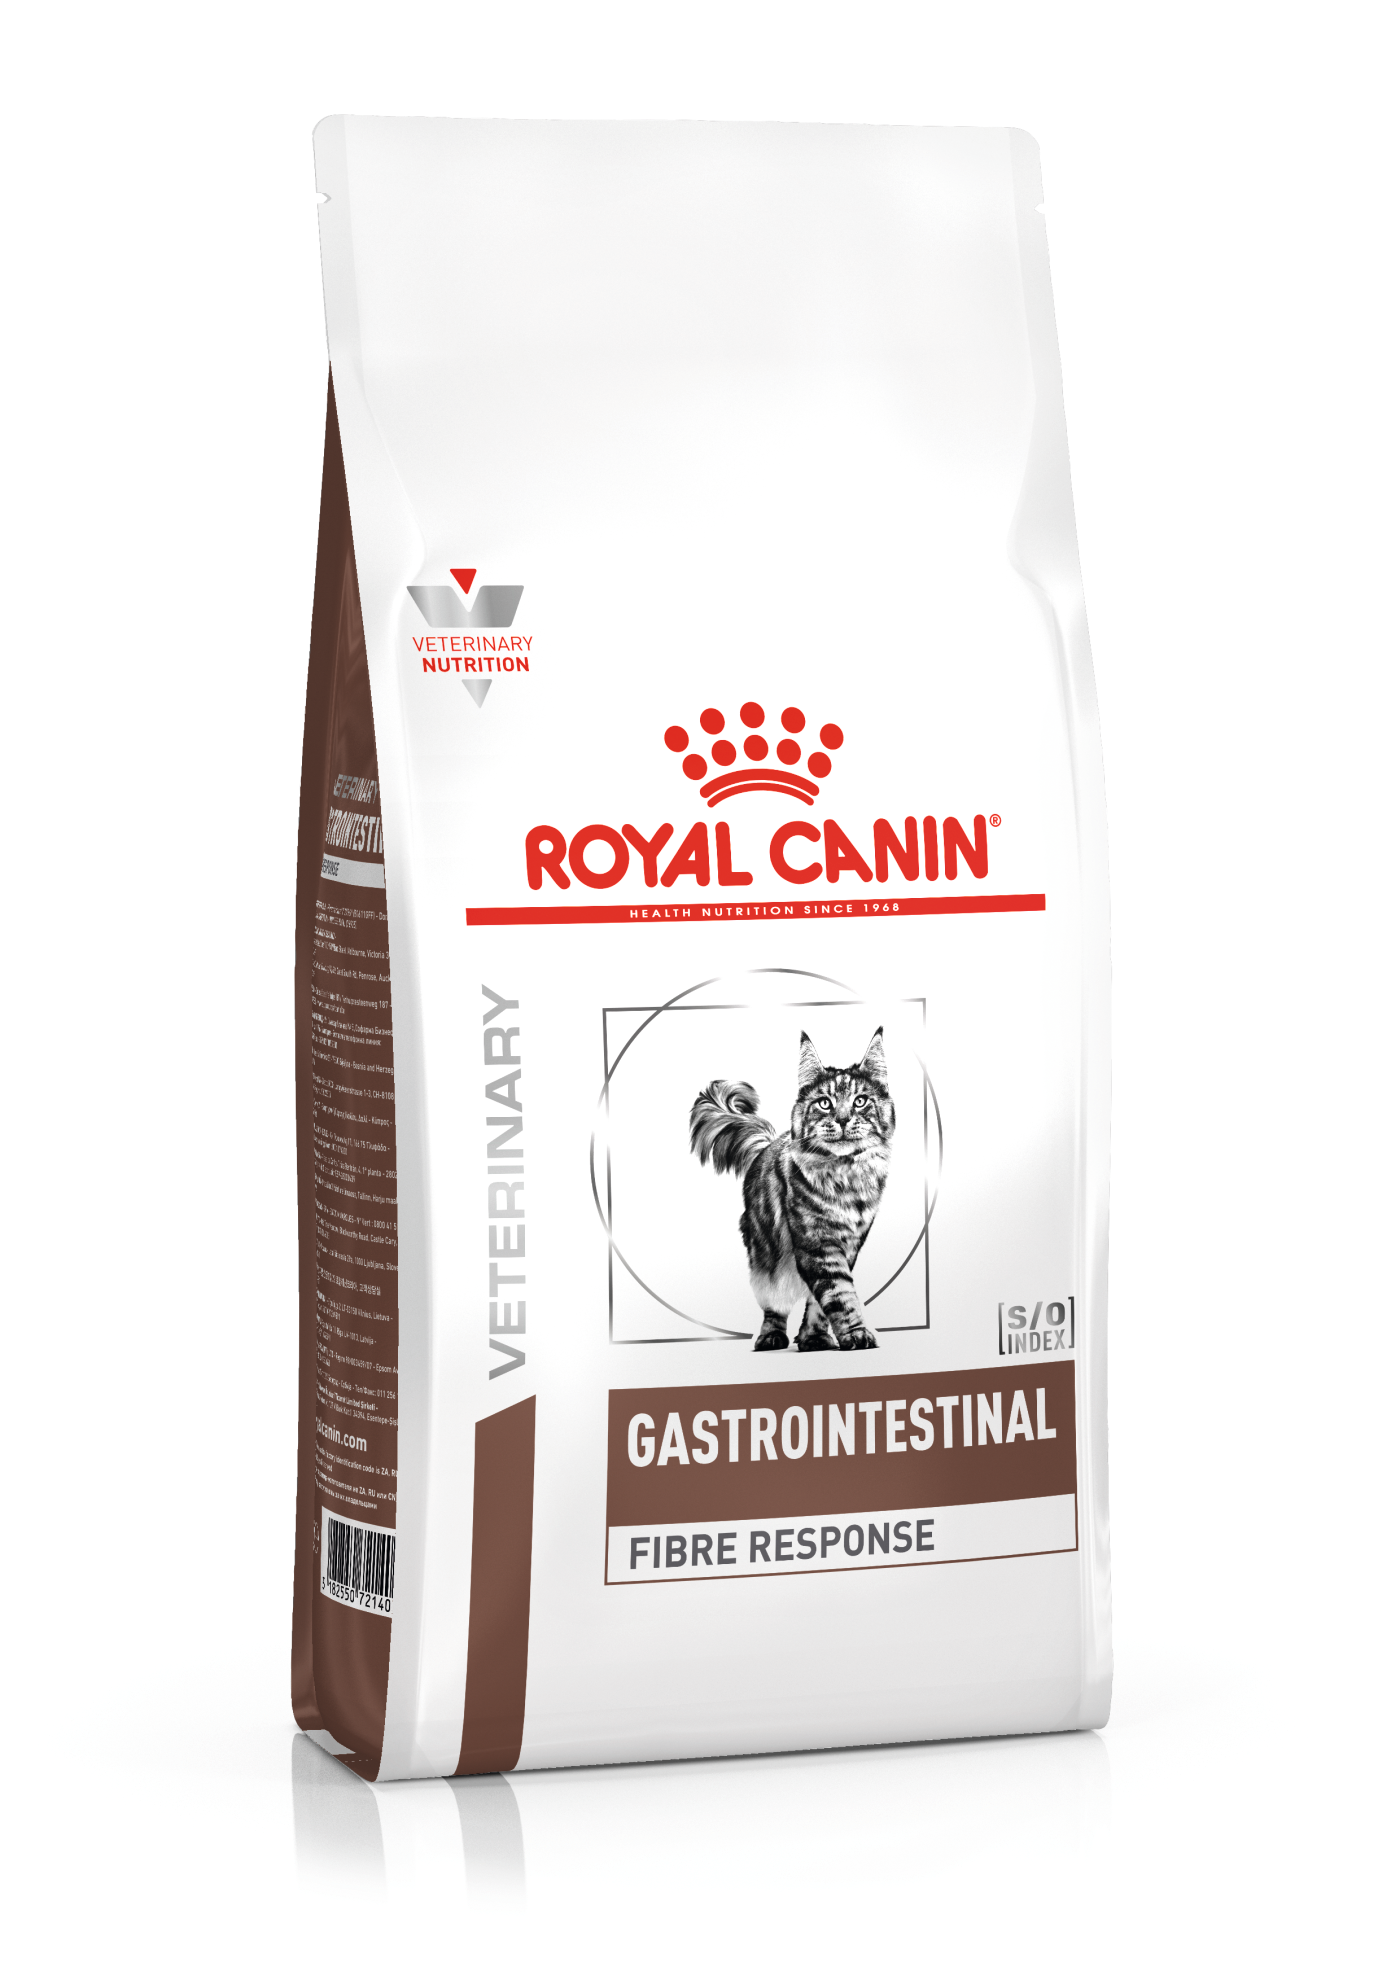 Royal Canin Gastrointestinal Fibre Response For Cat- (2 KG) – Dry food for Acute or chronic constipation